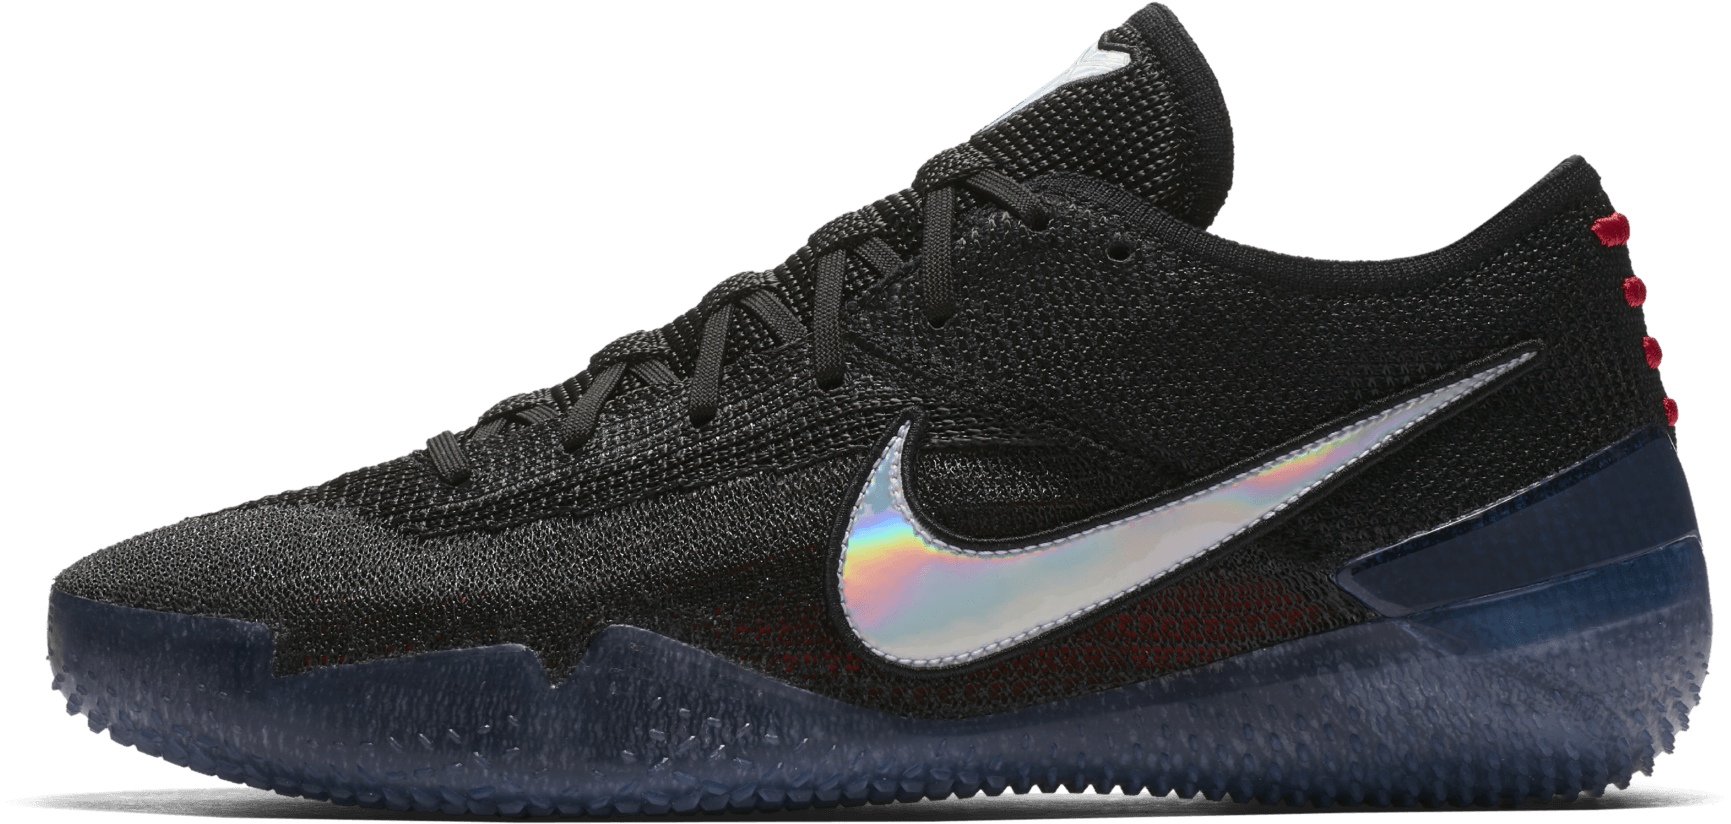 Nike Kobe AD NXT 360 - Review, Deals, Pics of 6 Colorways